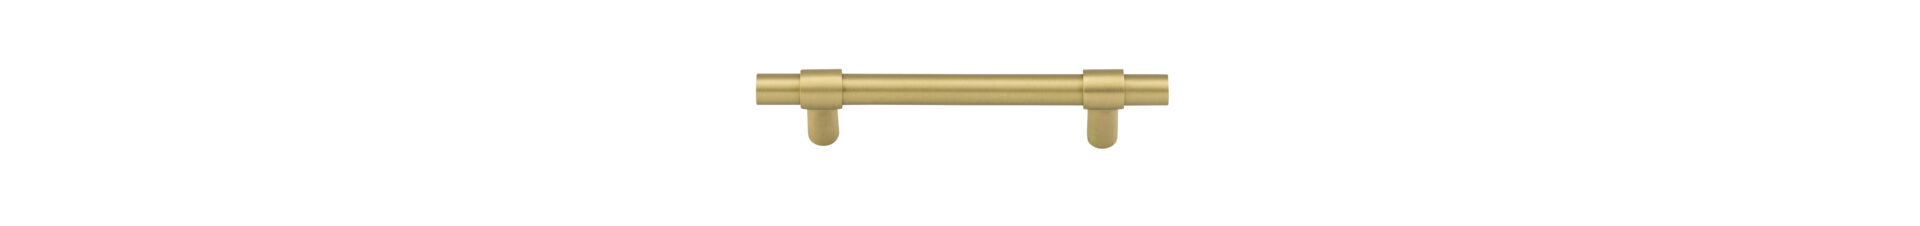 17151 - Helsinki Cabinet Pull - CTC96mm - Brushed Gold PVD